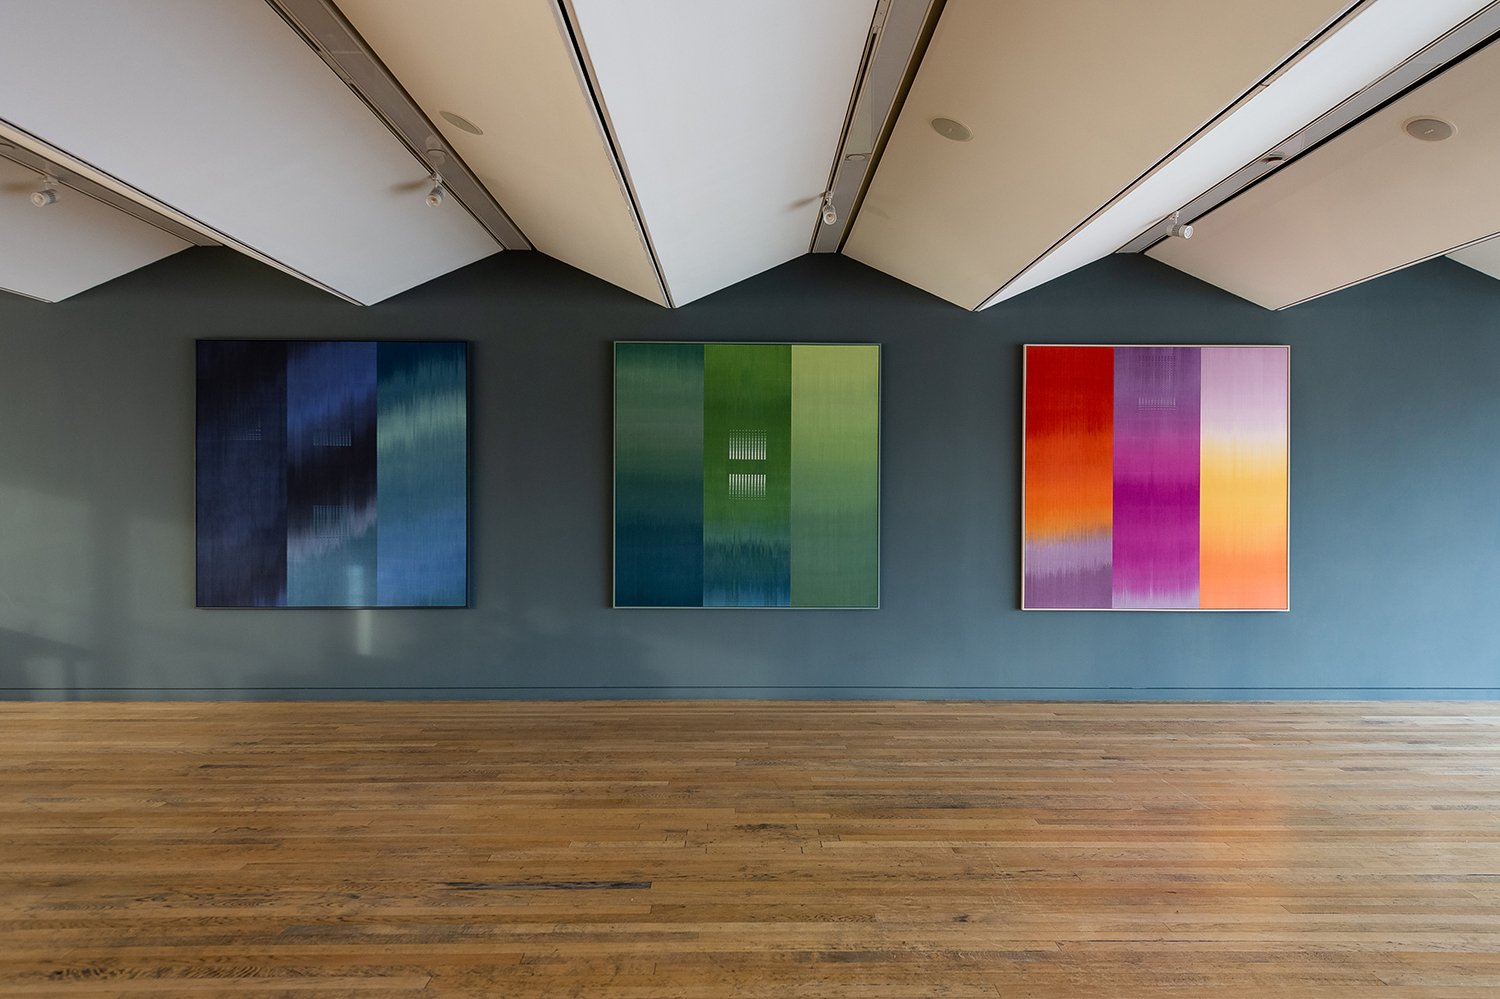 Installation view of Circadian Rhythm by Ptolemy Mann currently on show in the Blavatnik building at the Tate Modern, London, United Kingdom